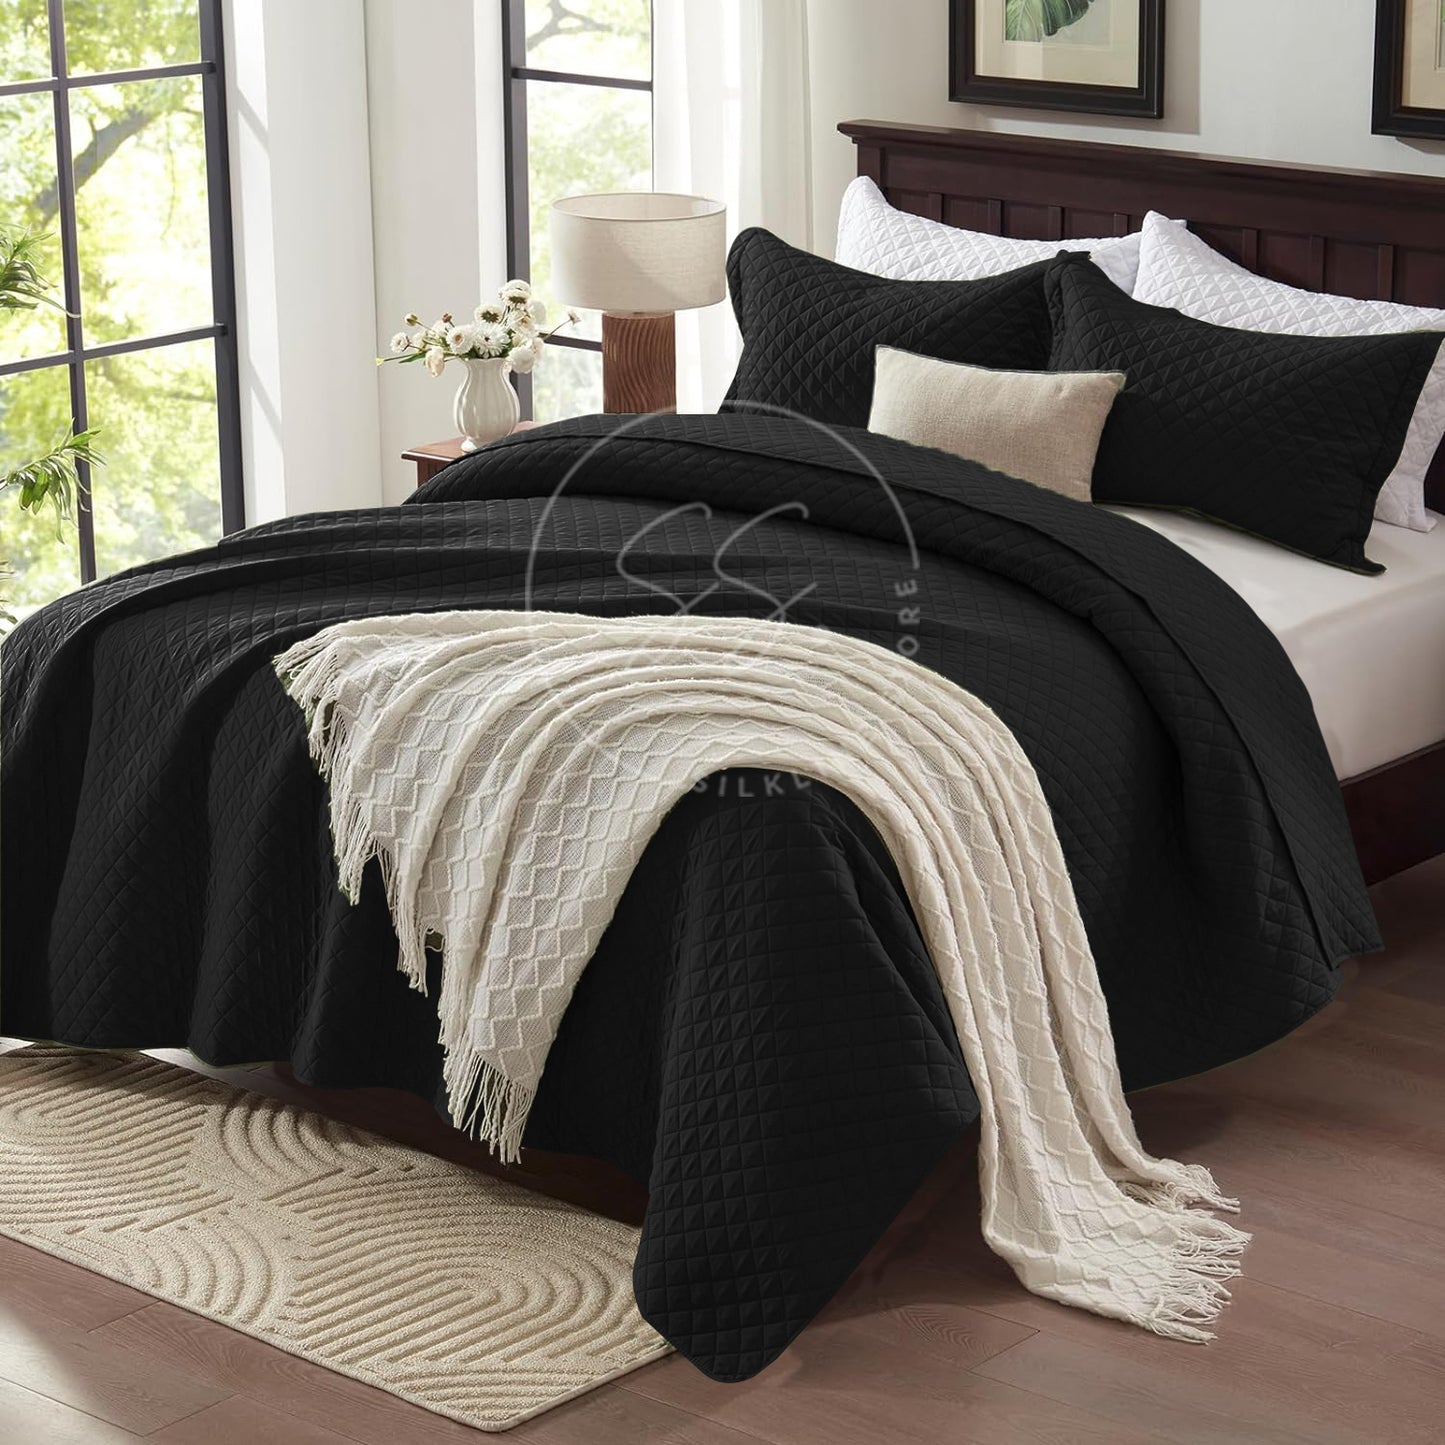 Midnight Black - king Size Microfibre: 3 pcs Quilted bedspread set